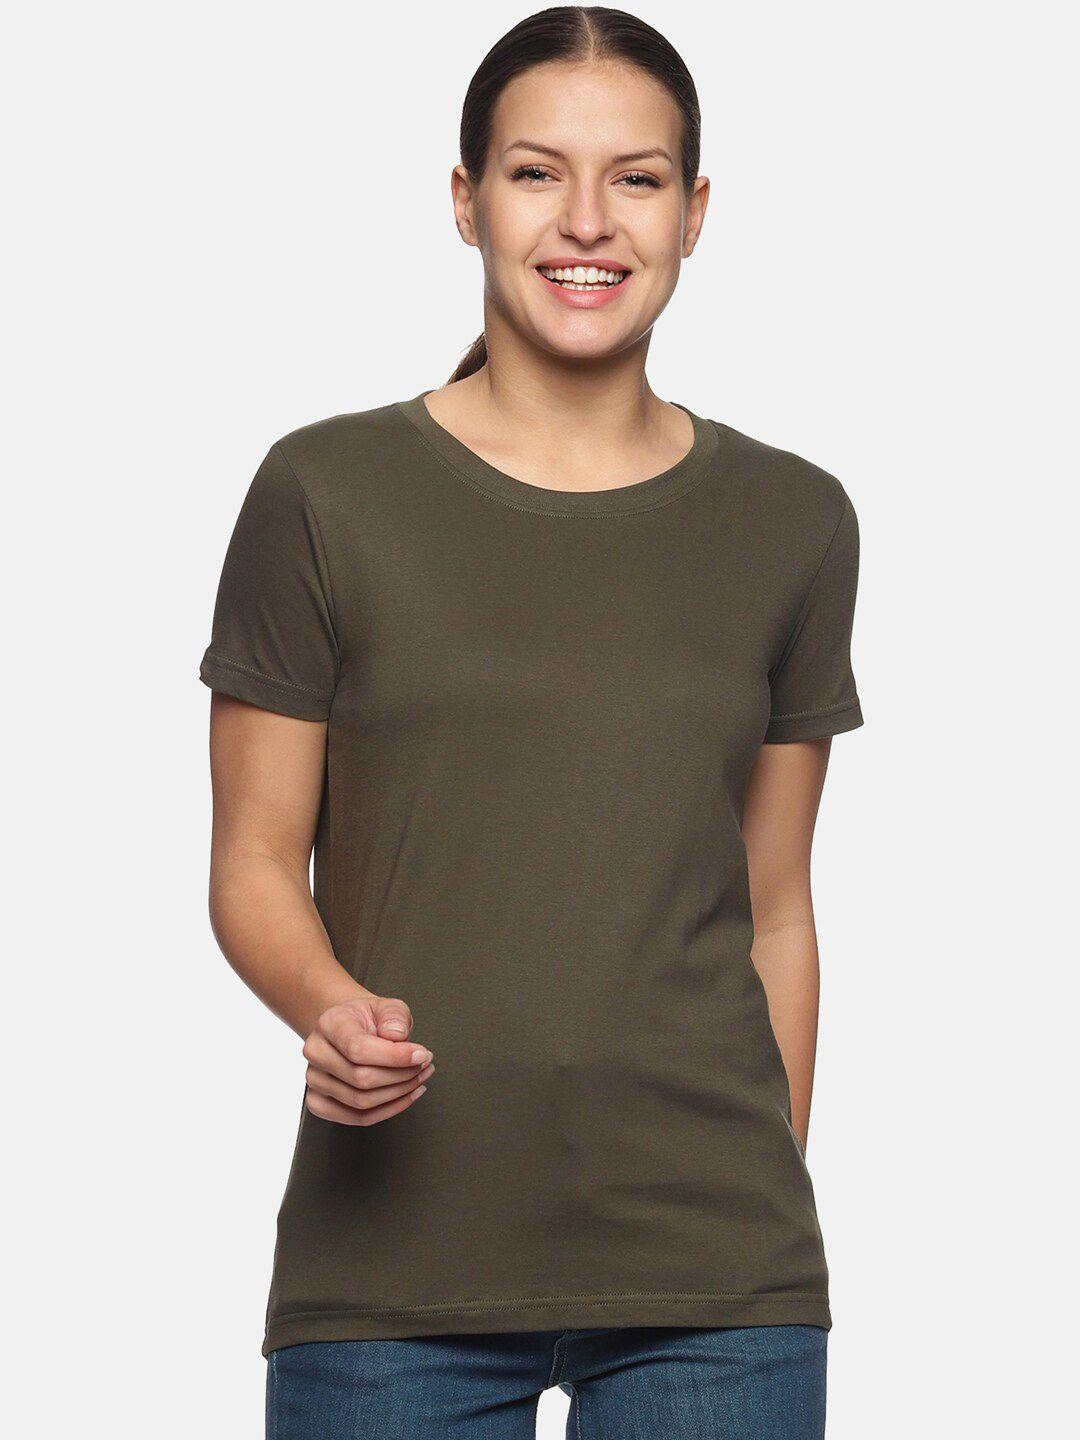 trends tower women olive green pure cotton t-shirt